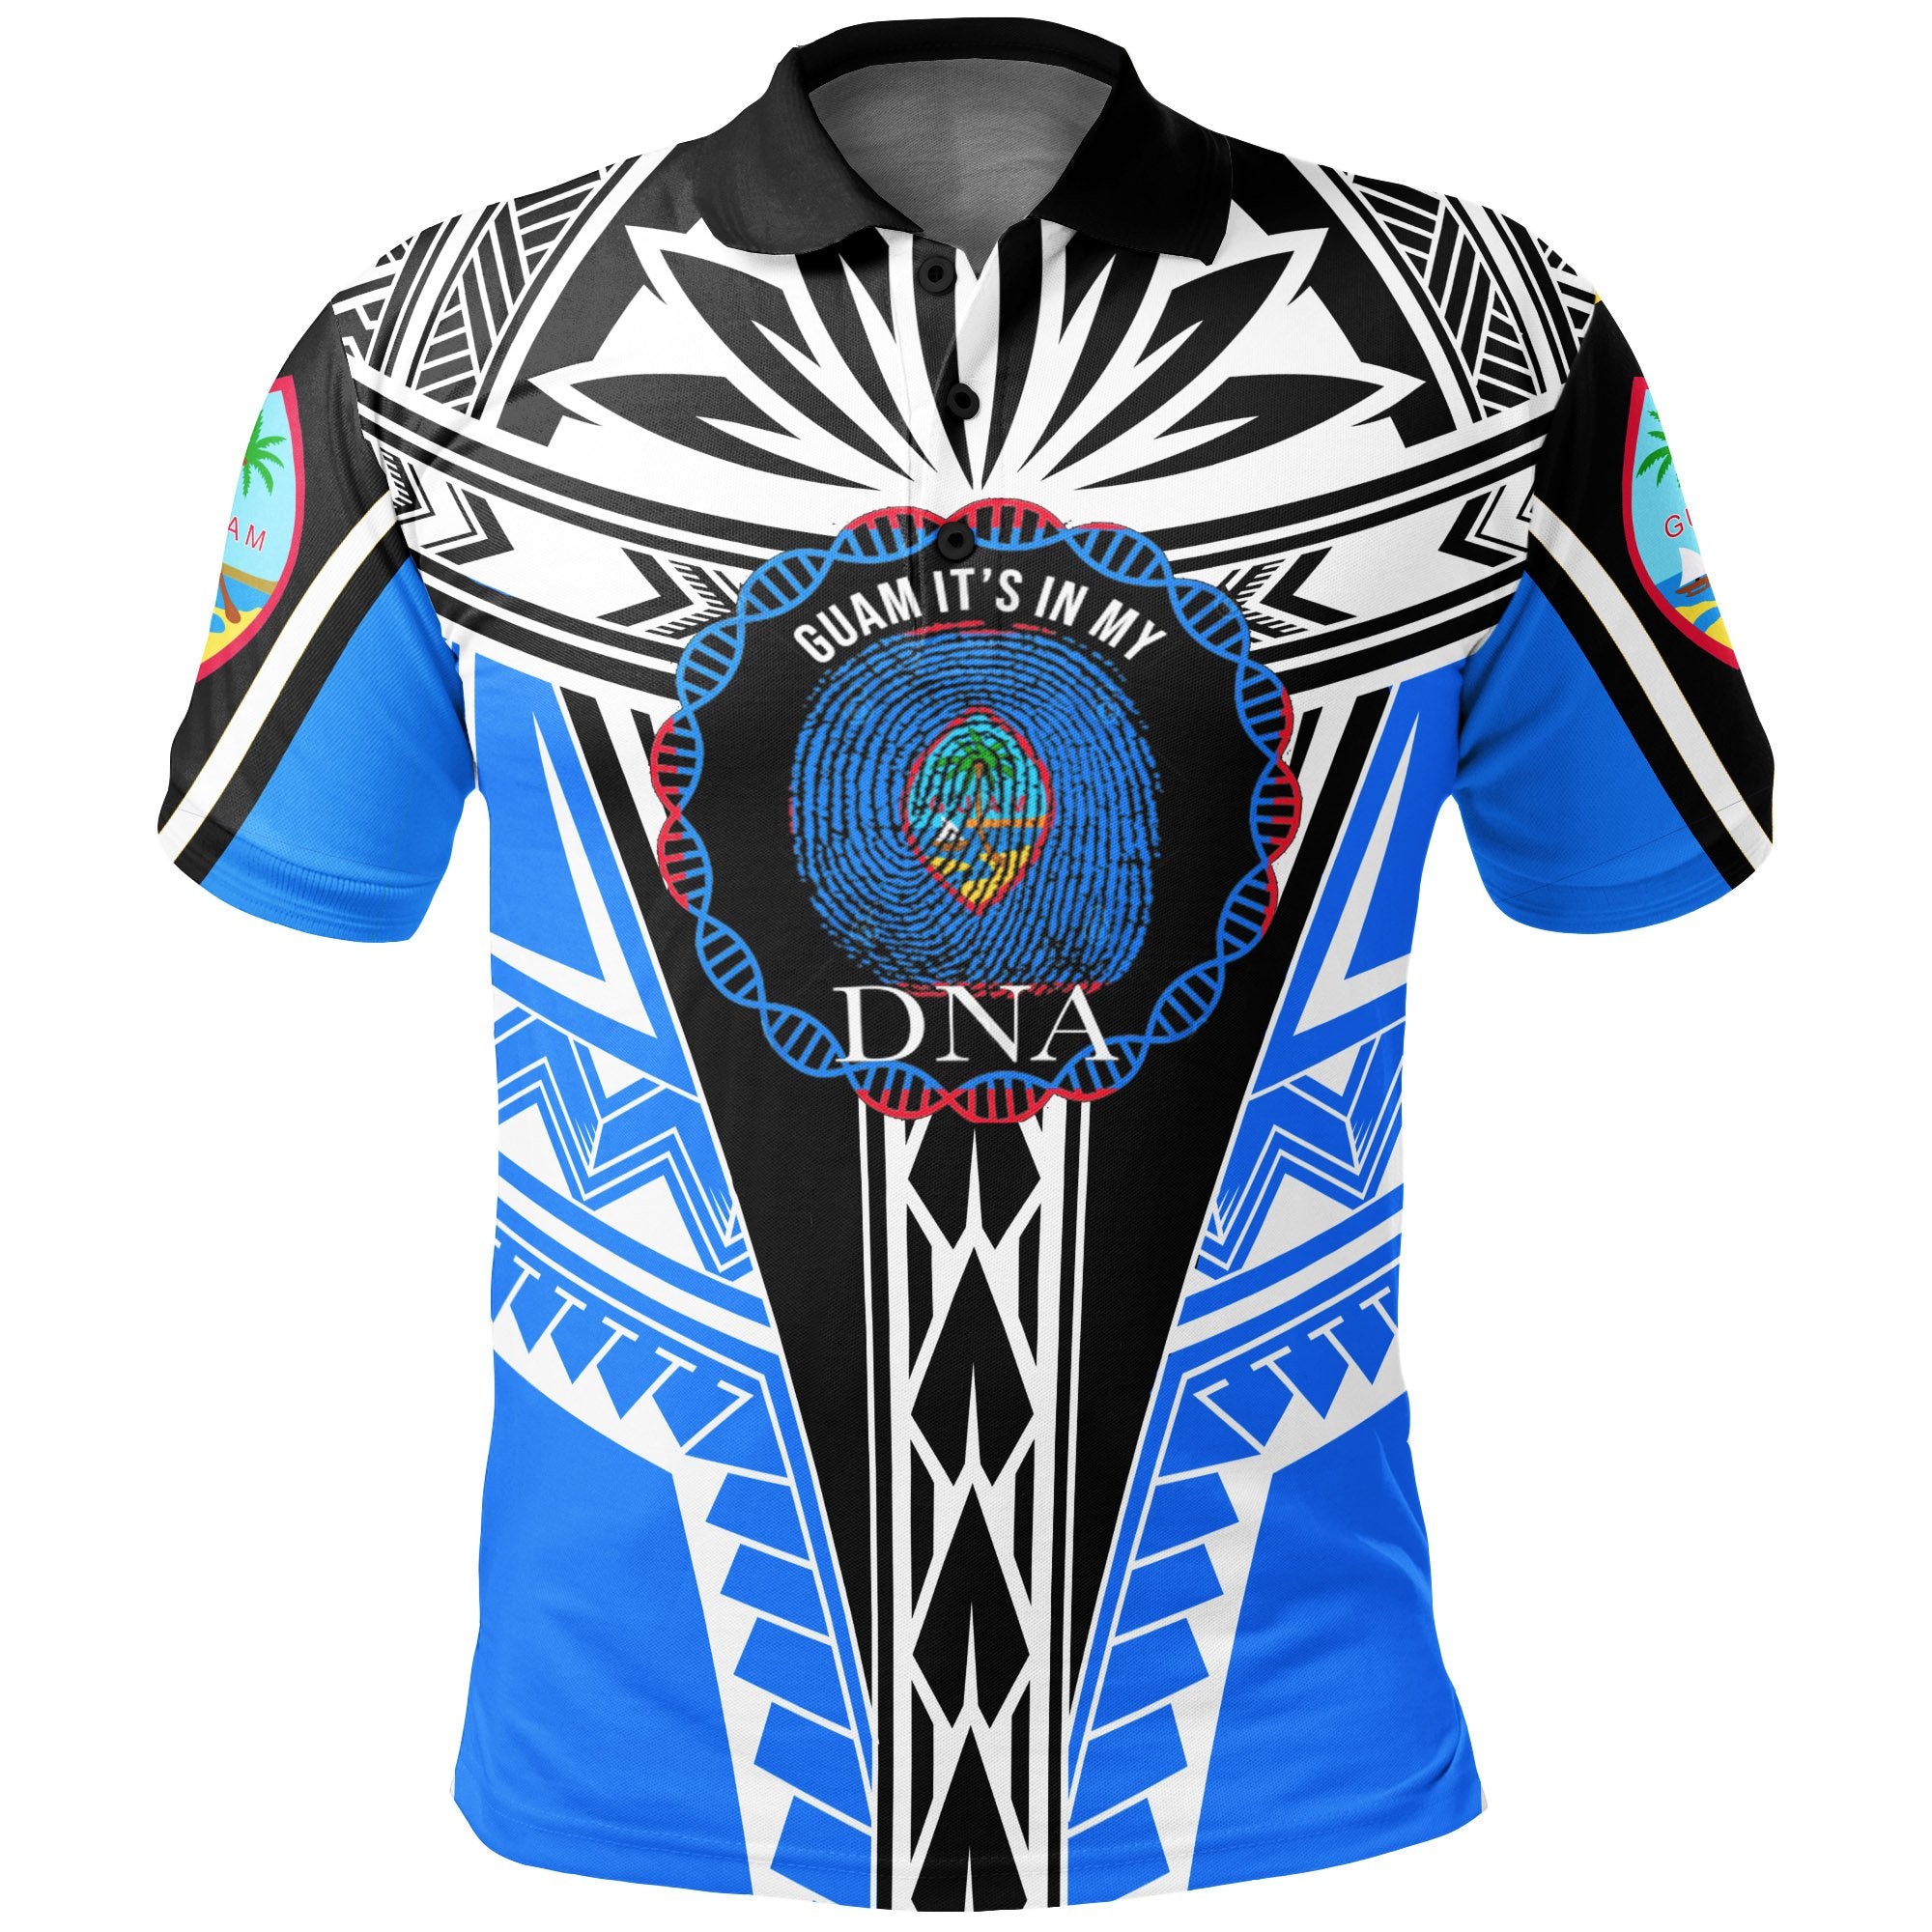 Guam Polo Shirt Its In My DNA White Blue Color Unisex Blue - Polynesian Pride